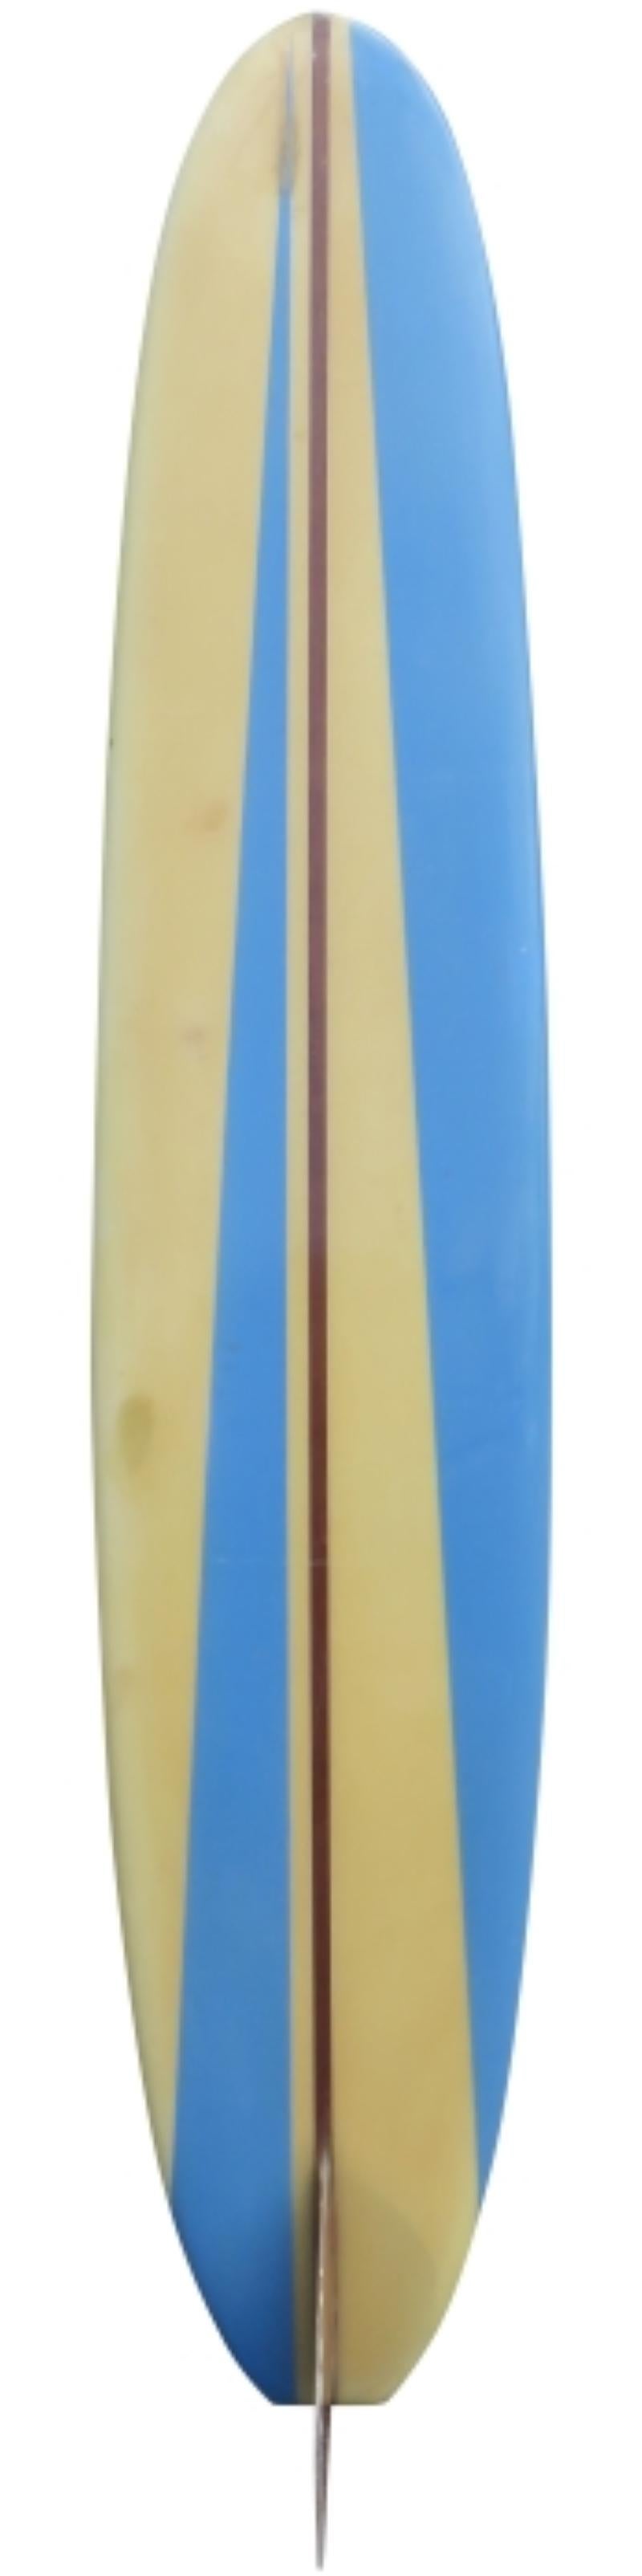 Early 1960s Con Surfboards label longboard. Features bright blue panel designs with gorgeous redwood single fin. A fantastic example of an all original 1960’s vintage longboard made in Santa Monica, California.